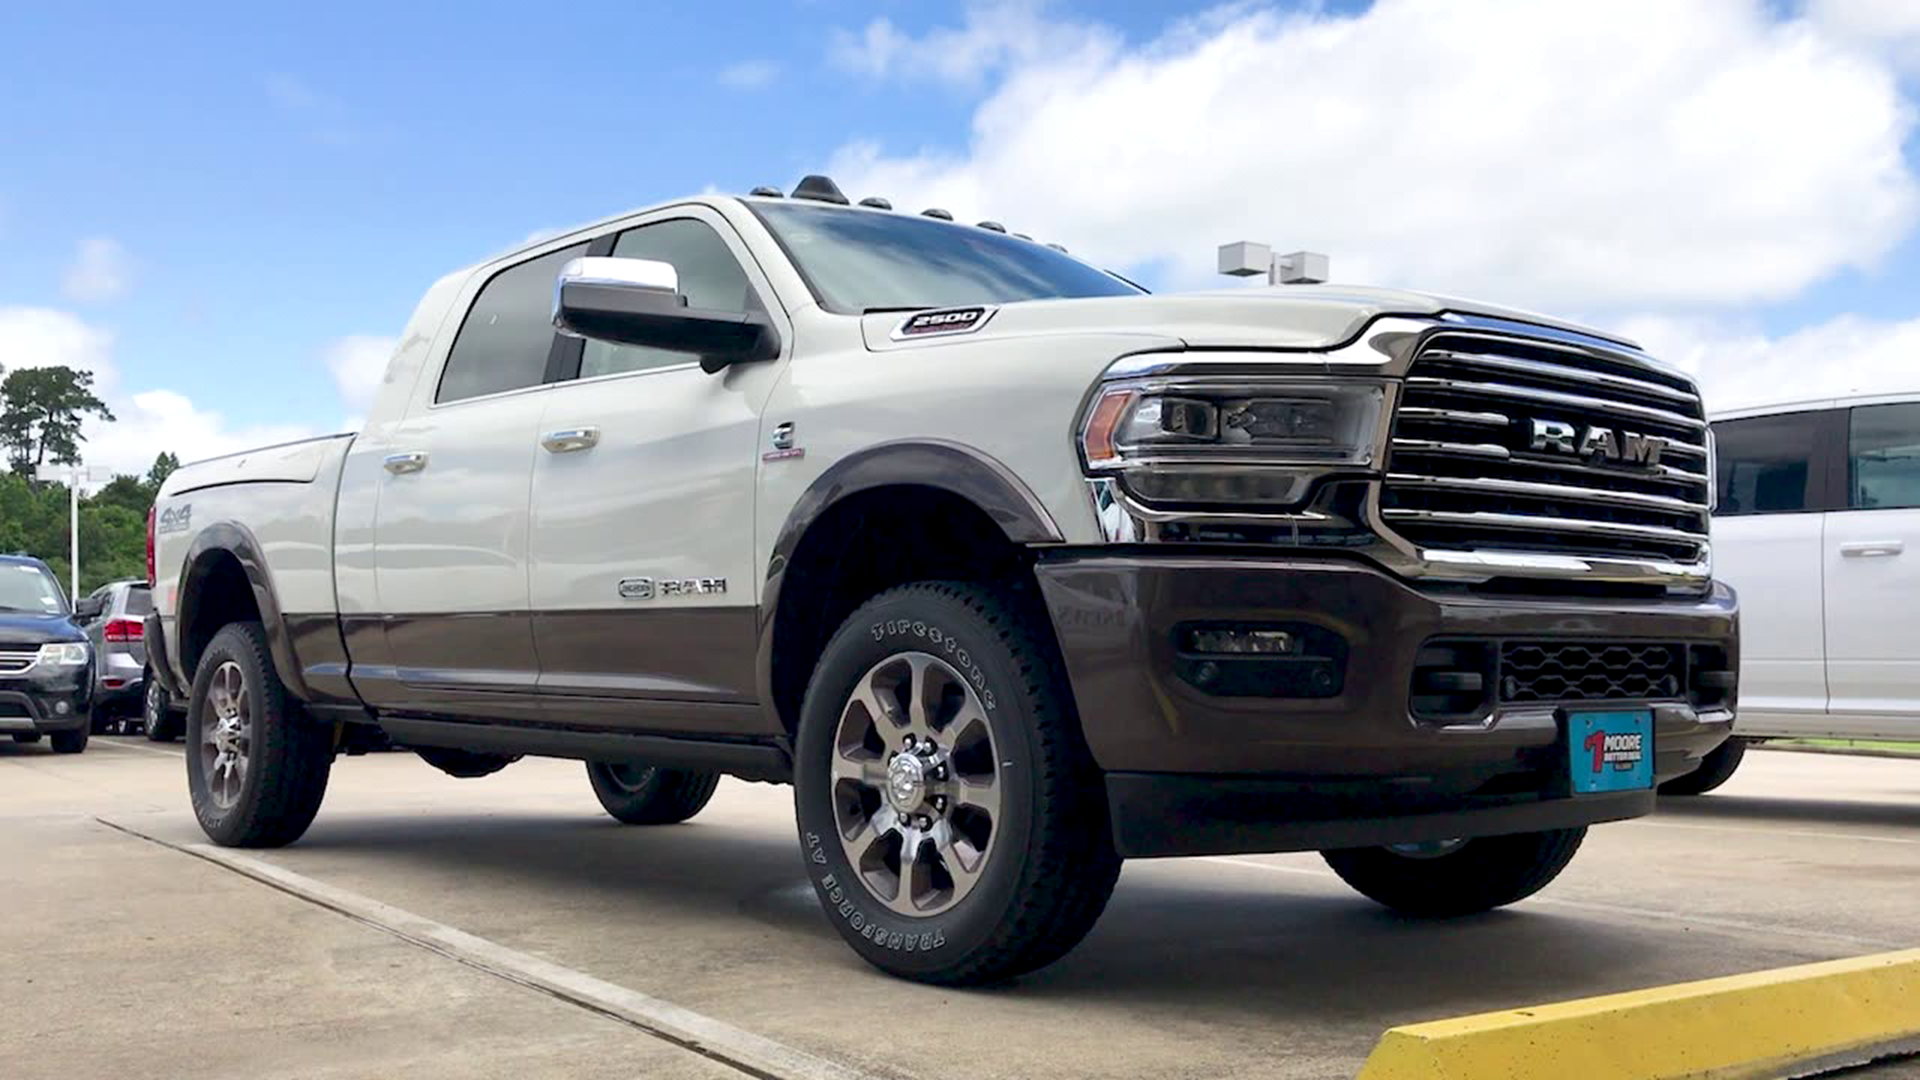 Today we took a 2019 RAM 2500 Laramie Longhorn Edition 4x4 pickup out for a spin. Call Moore Chrysler Dodge Jeep Ram in Silsbee at (409) 385-3796 or visit them at http://1MooreCDJR.com to get yours!